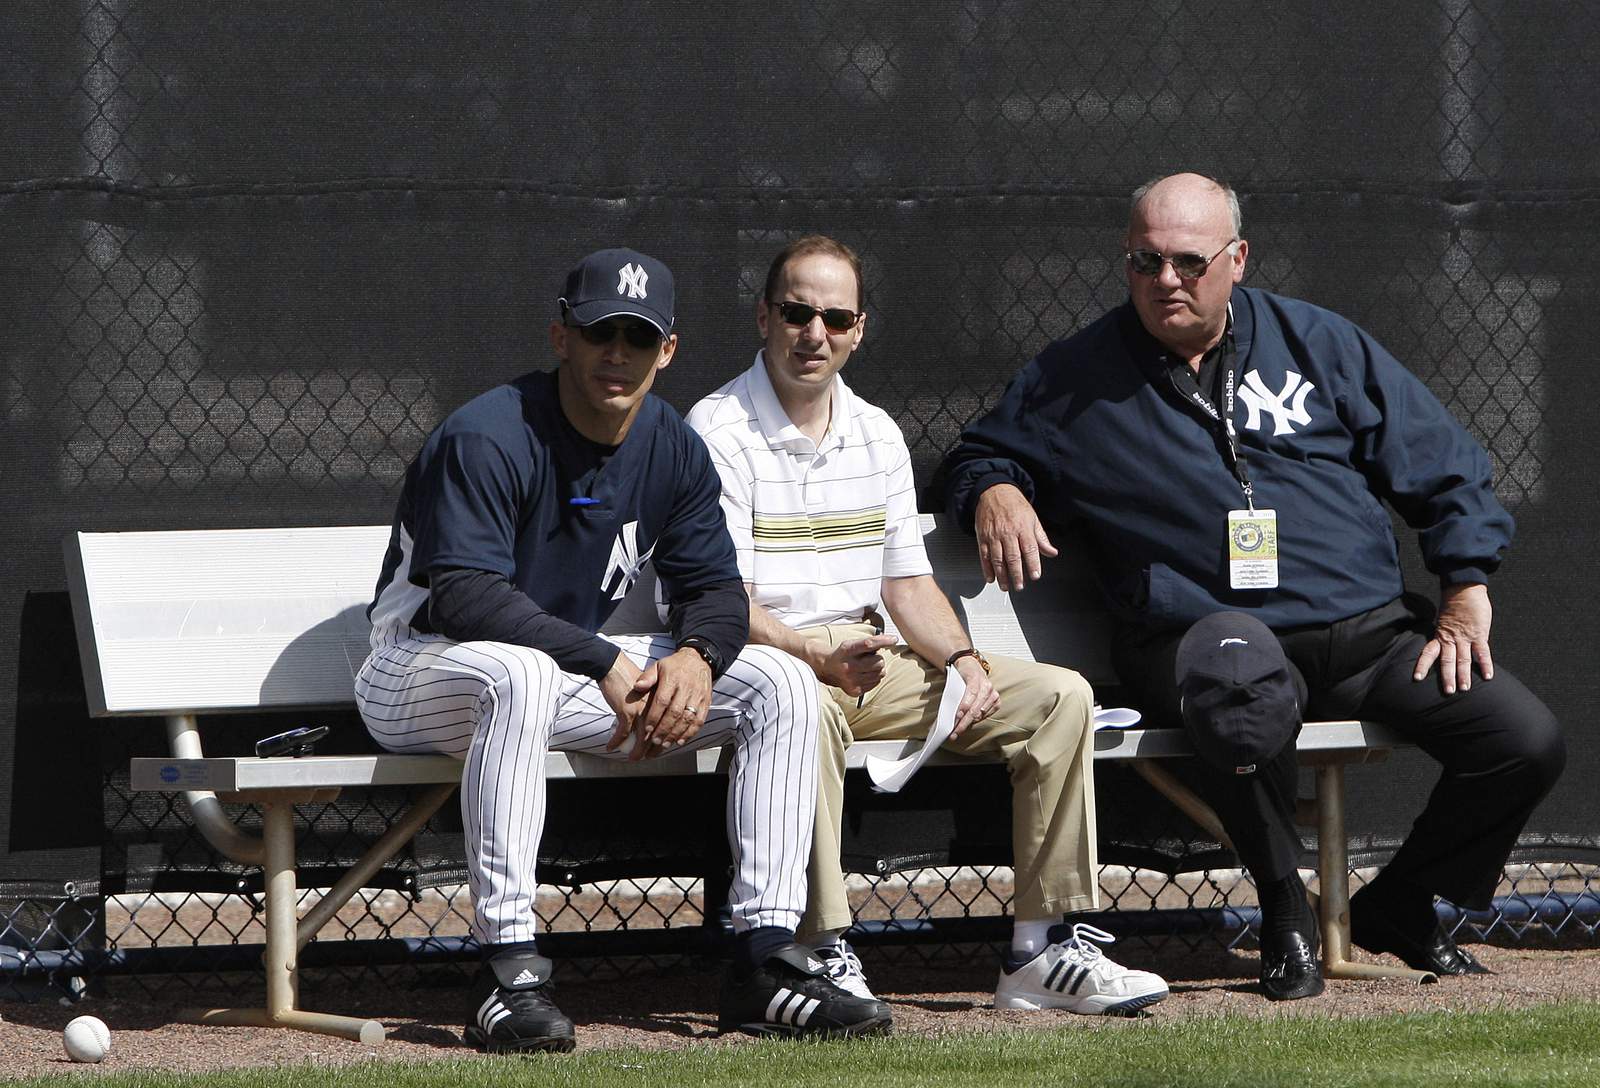 Mark Newman, oversaw Yankees' prospects, dead at 71